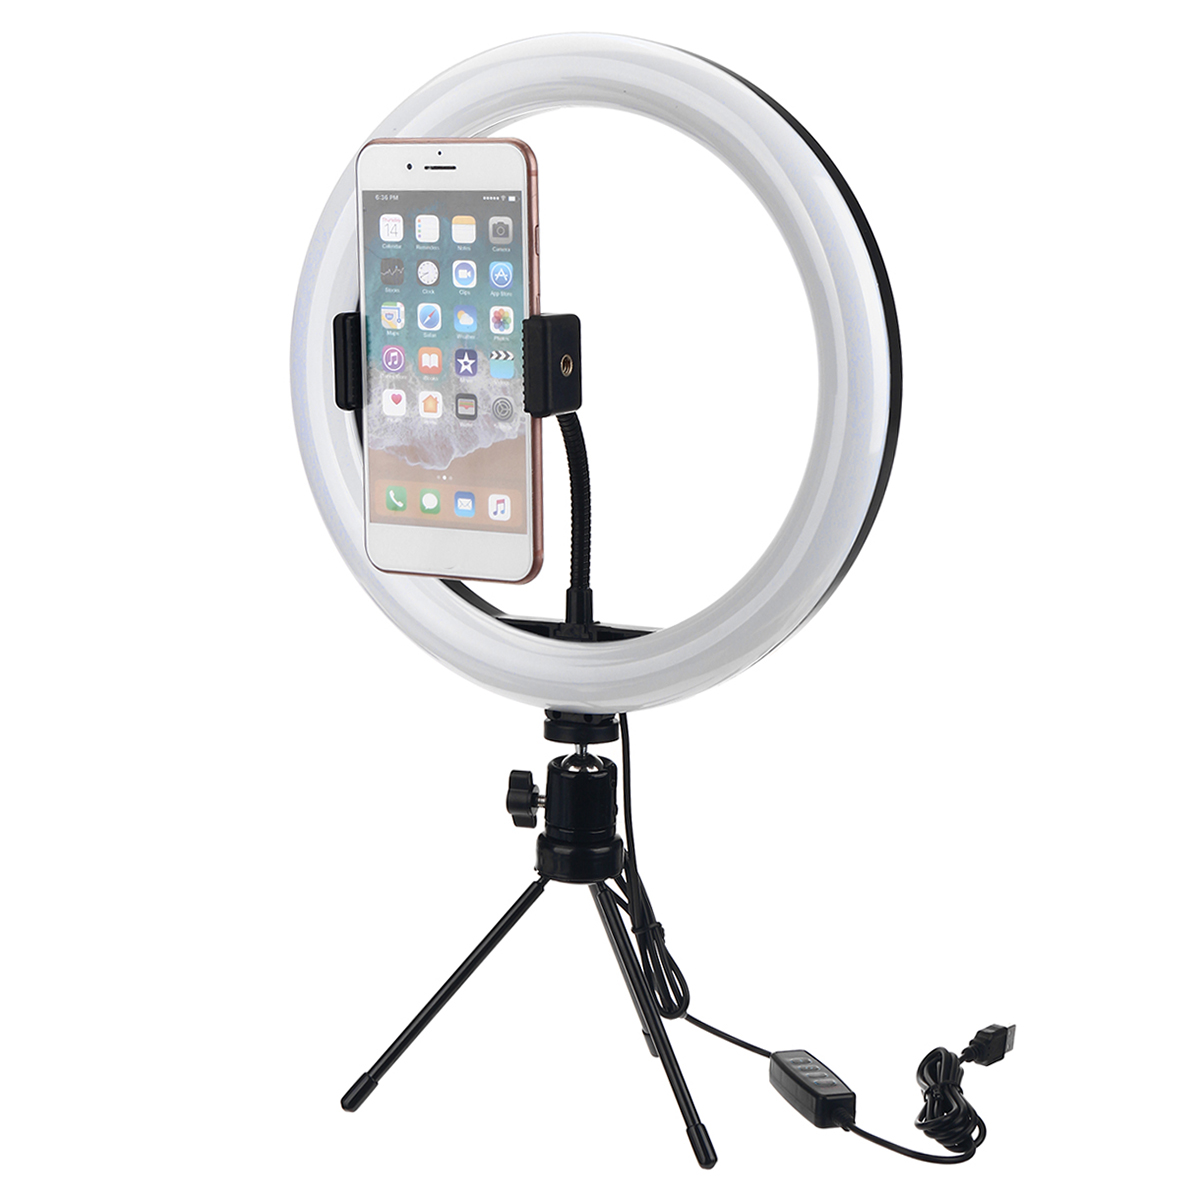 Dimmable-LED-Ring-Light-Lamp-18CM-26CM-Fill-Light-for-Makeup-Live-Stream-Selfie-Photography-Video-Re-1680025-9